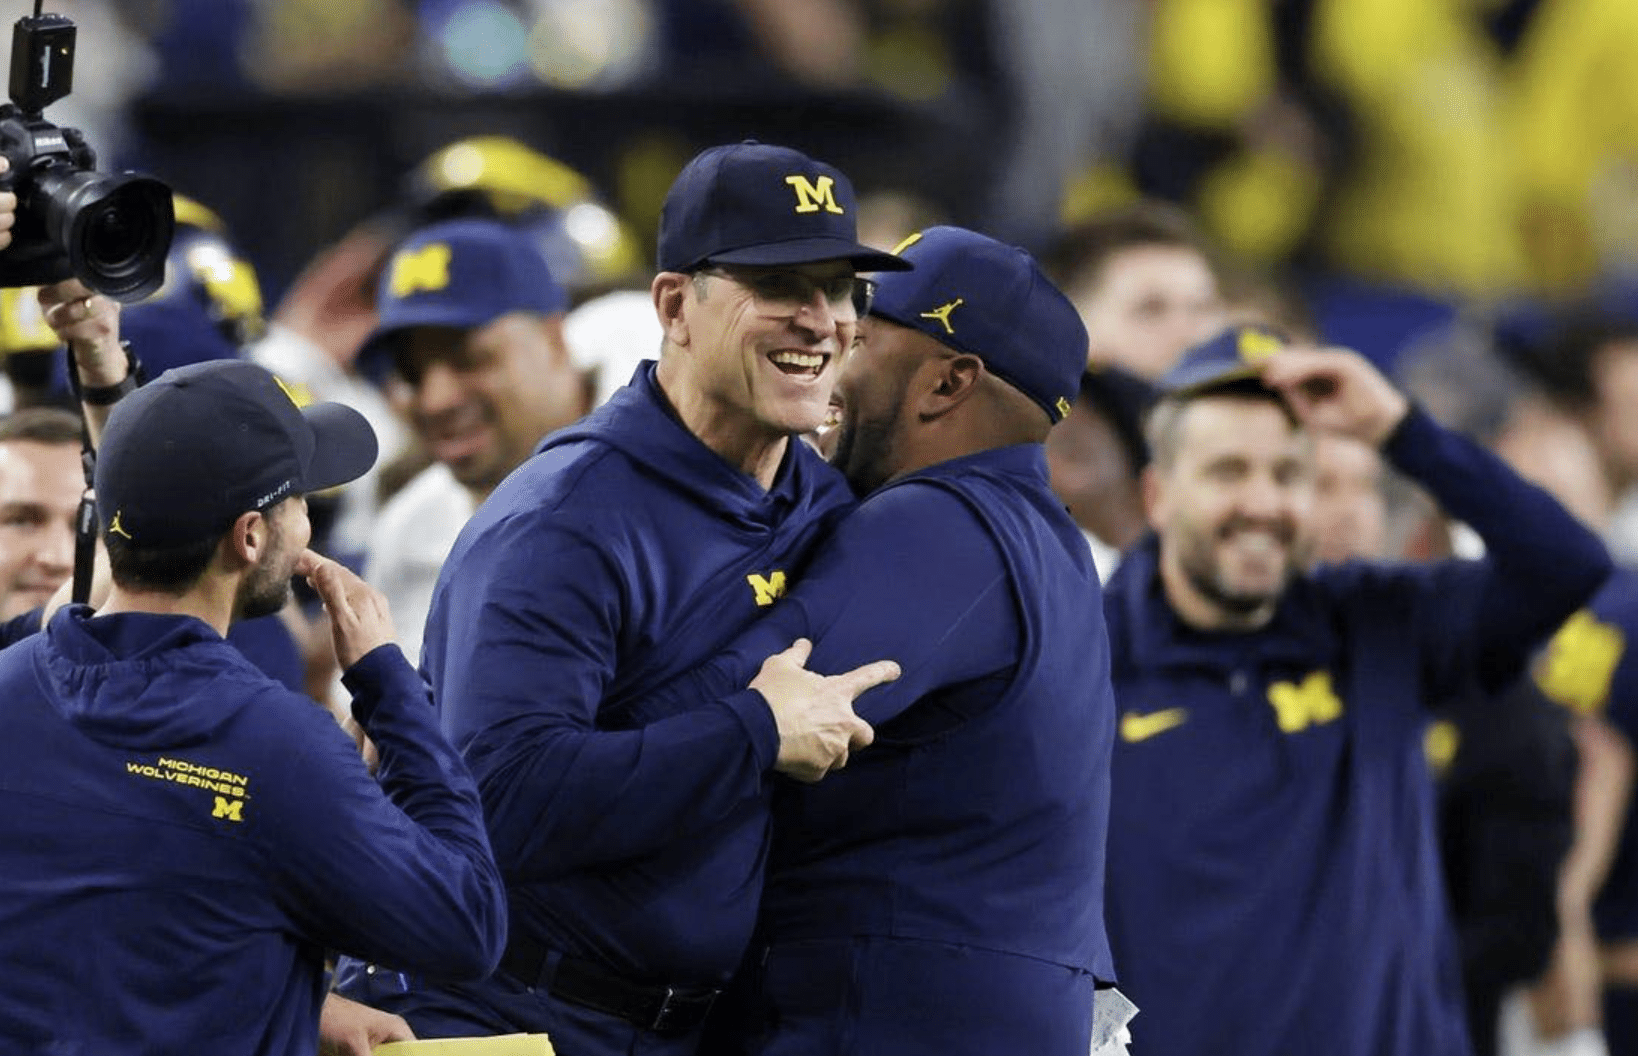 Jim Harbaugh leaves Michigan Jim Harbaugh to meet Mike Valenti compares Michigan Football Michigan head coach Jim Harbaugh lands interview Jim Harbaugh says there will Photo Credit: Thomas Shea, USA Today Sports